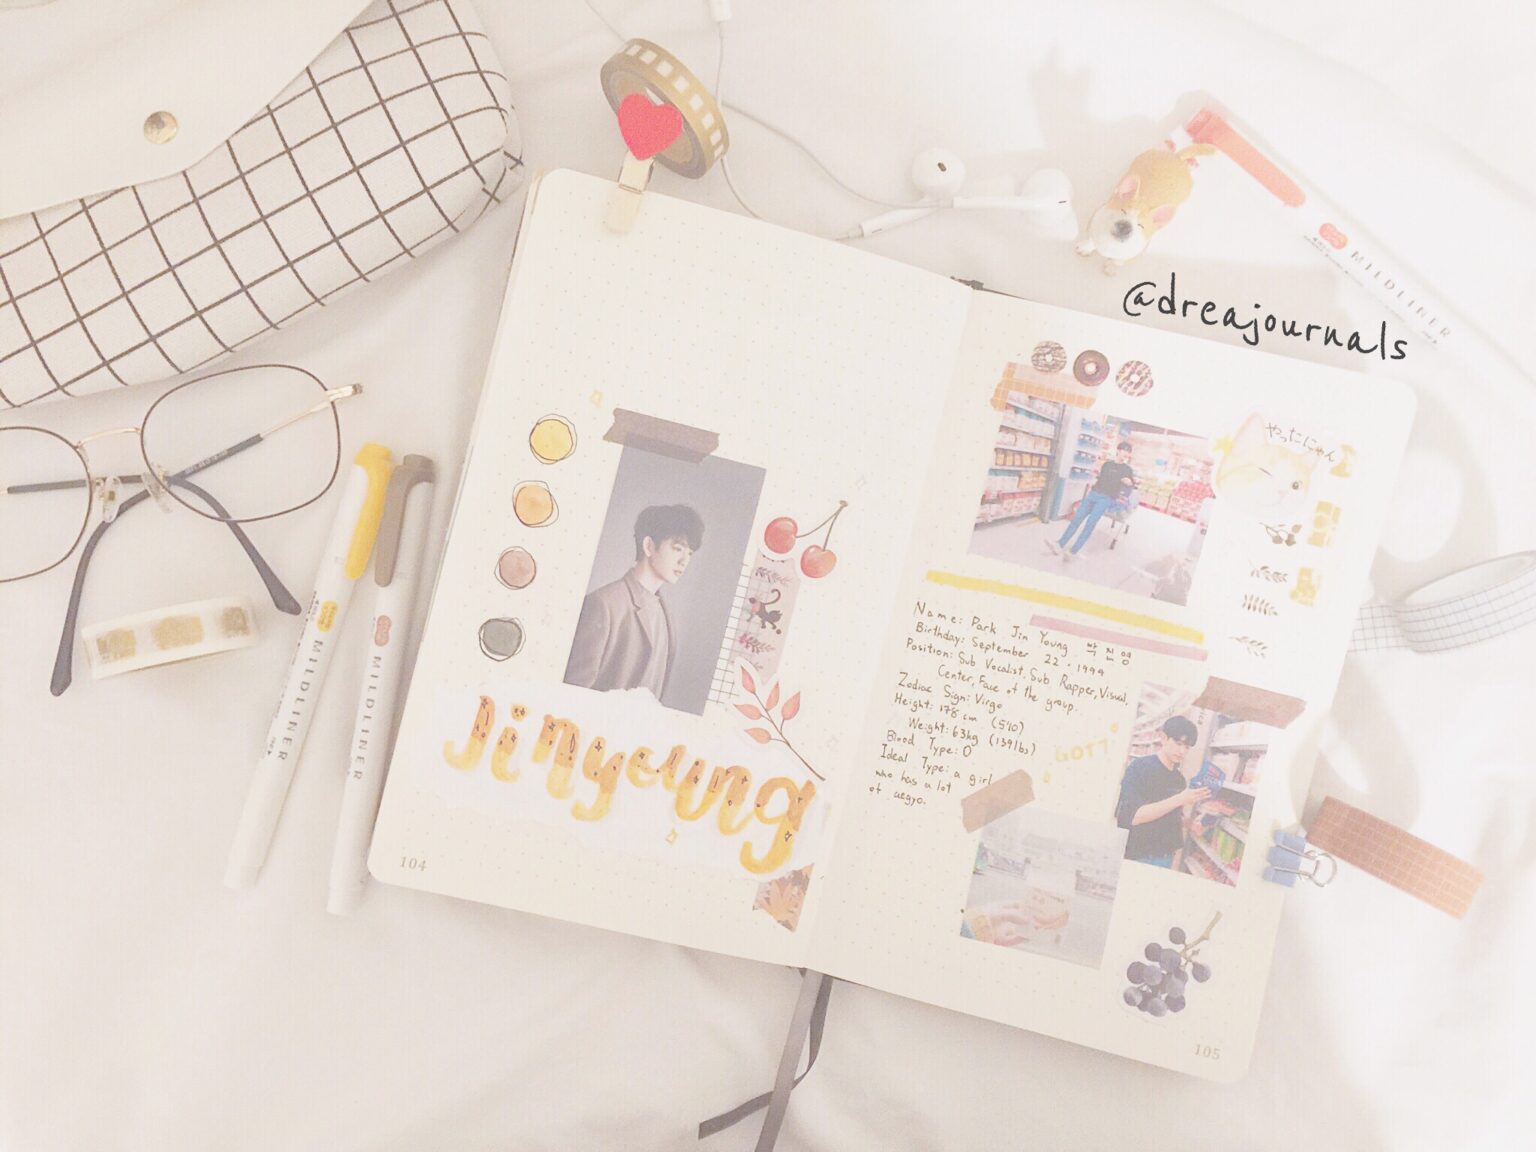 62 Popular Kpop Journaling Spreads for Inspiration - atinydreamer